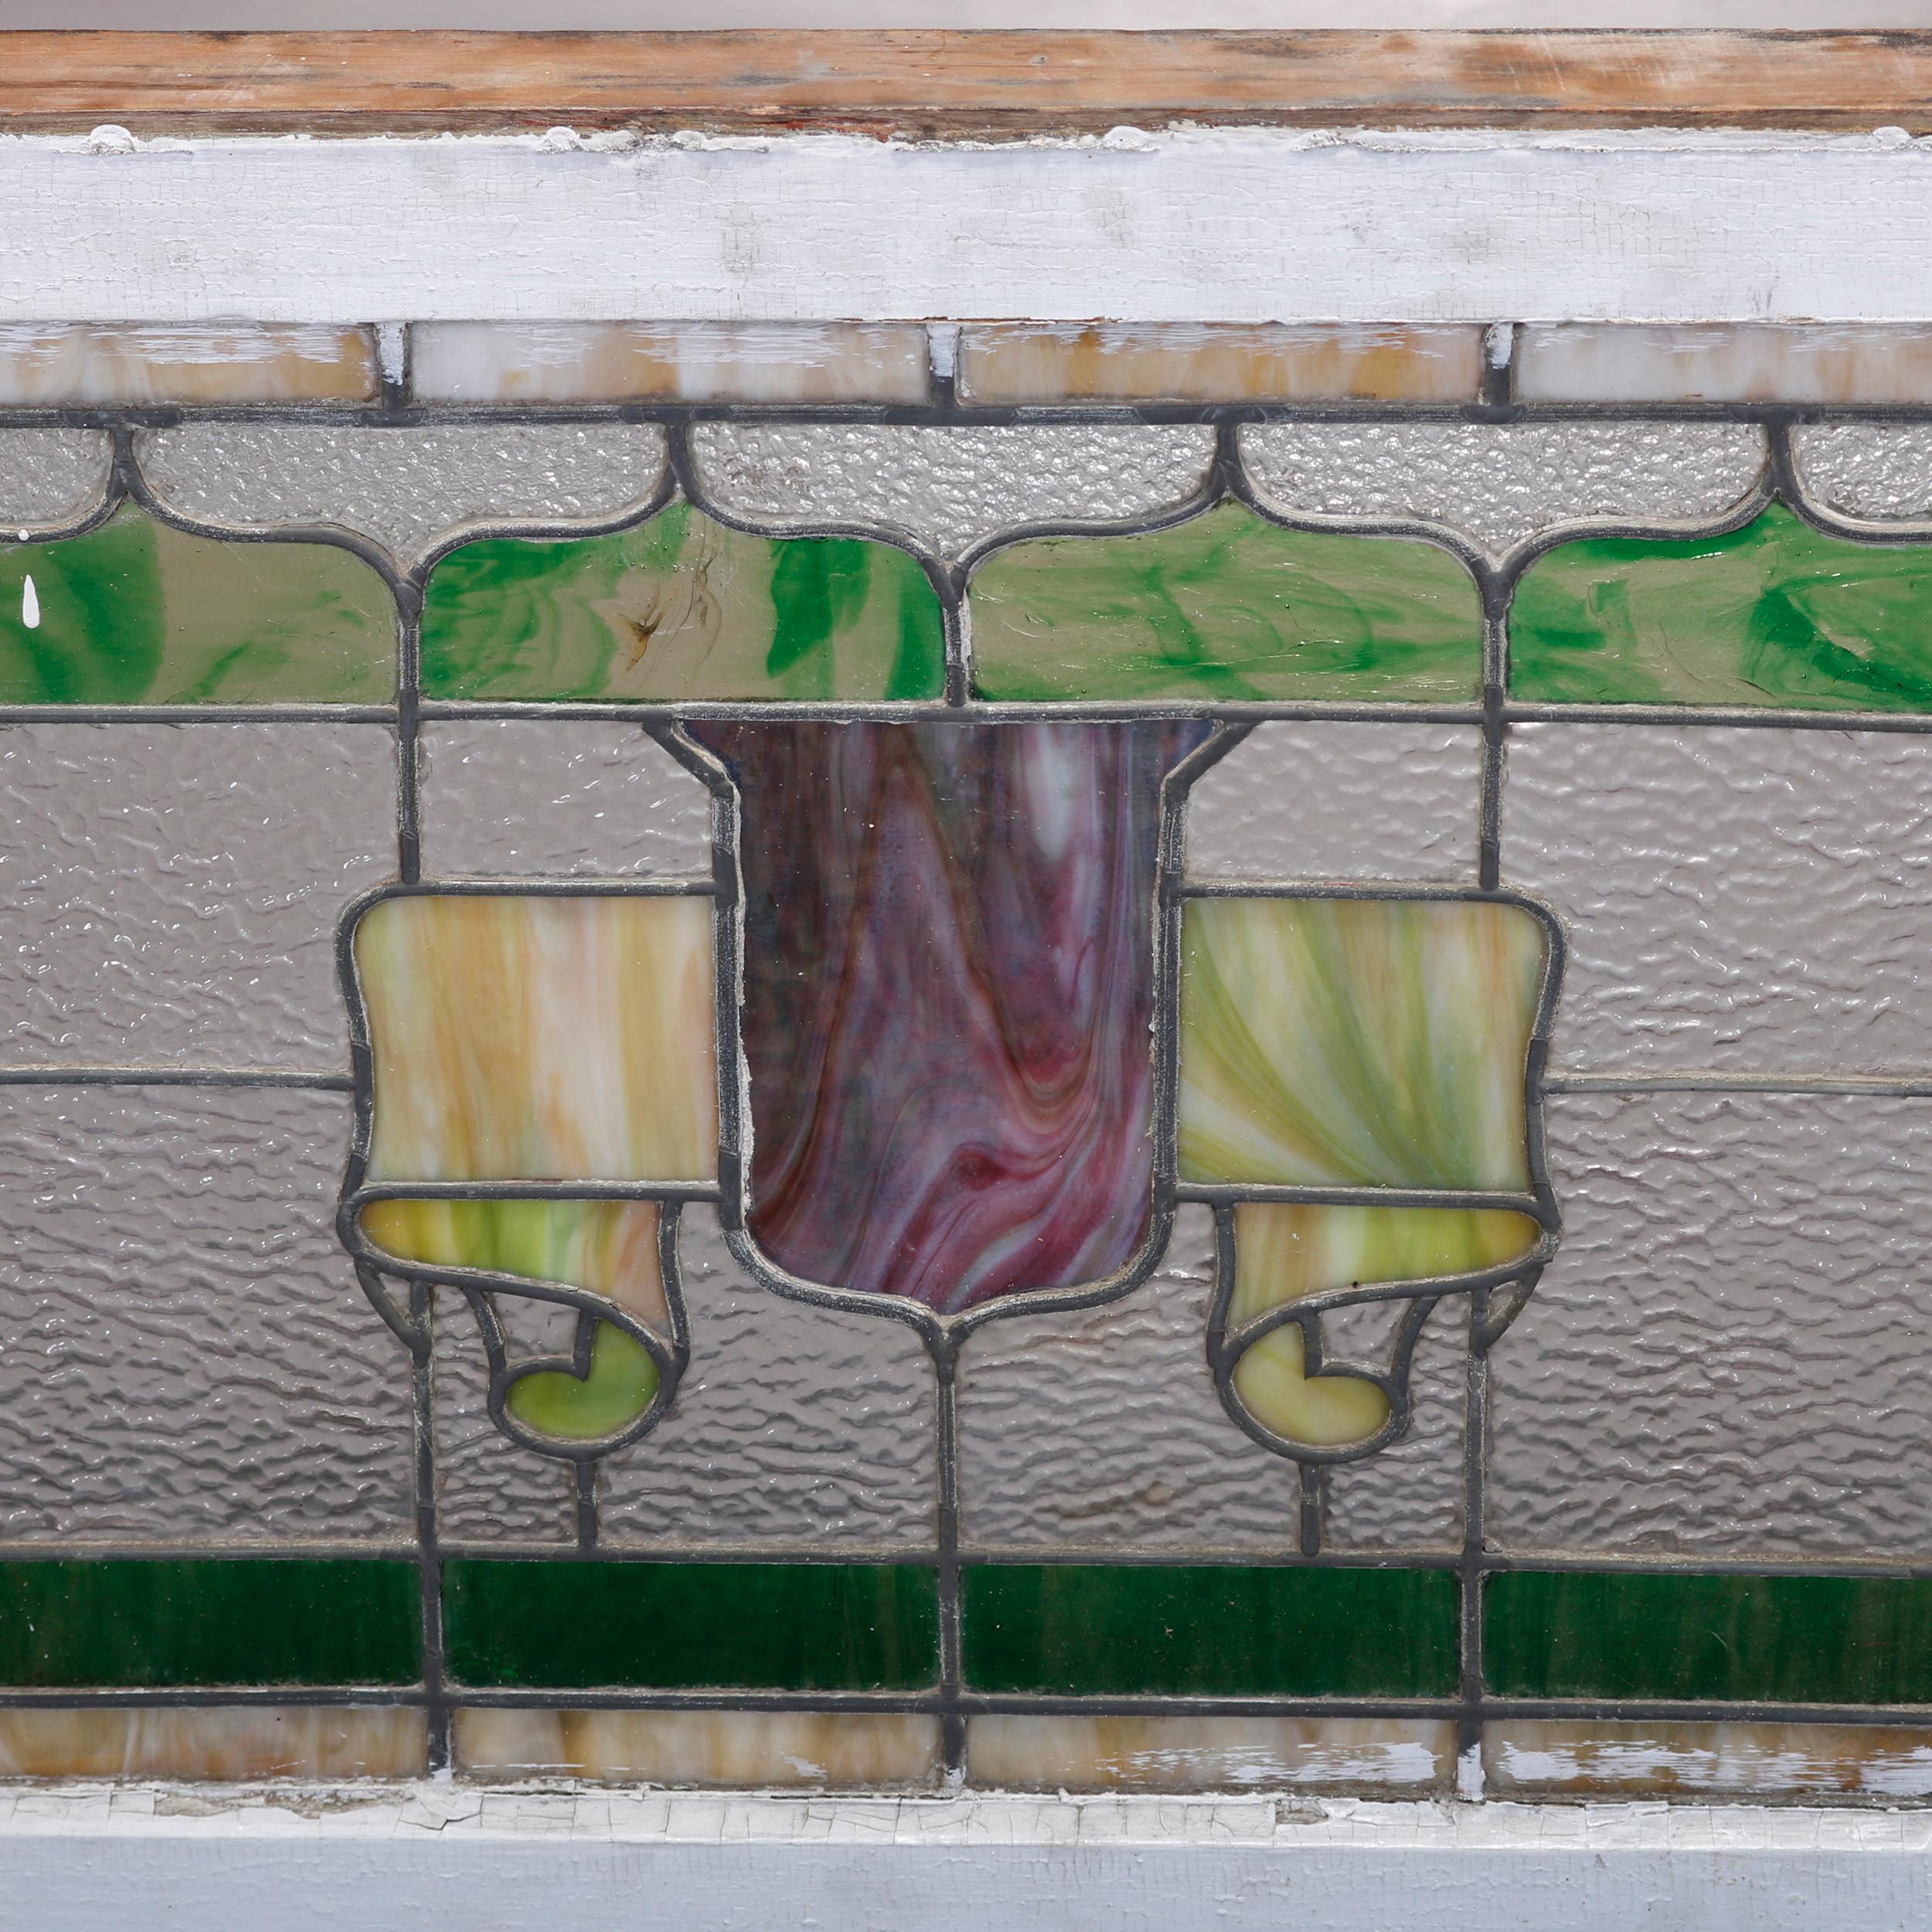 An antique Arts & Crafts leaded glass window in the manner of Frank Lloyd Wright offers slag and colorless glass panel having central shield and flanking stylized floral elements, seated in original wood frame, circa 1910

Measures: 23